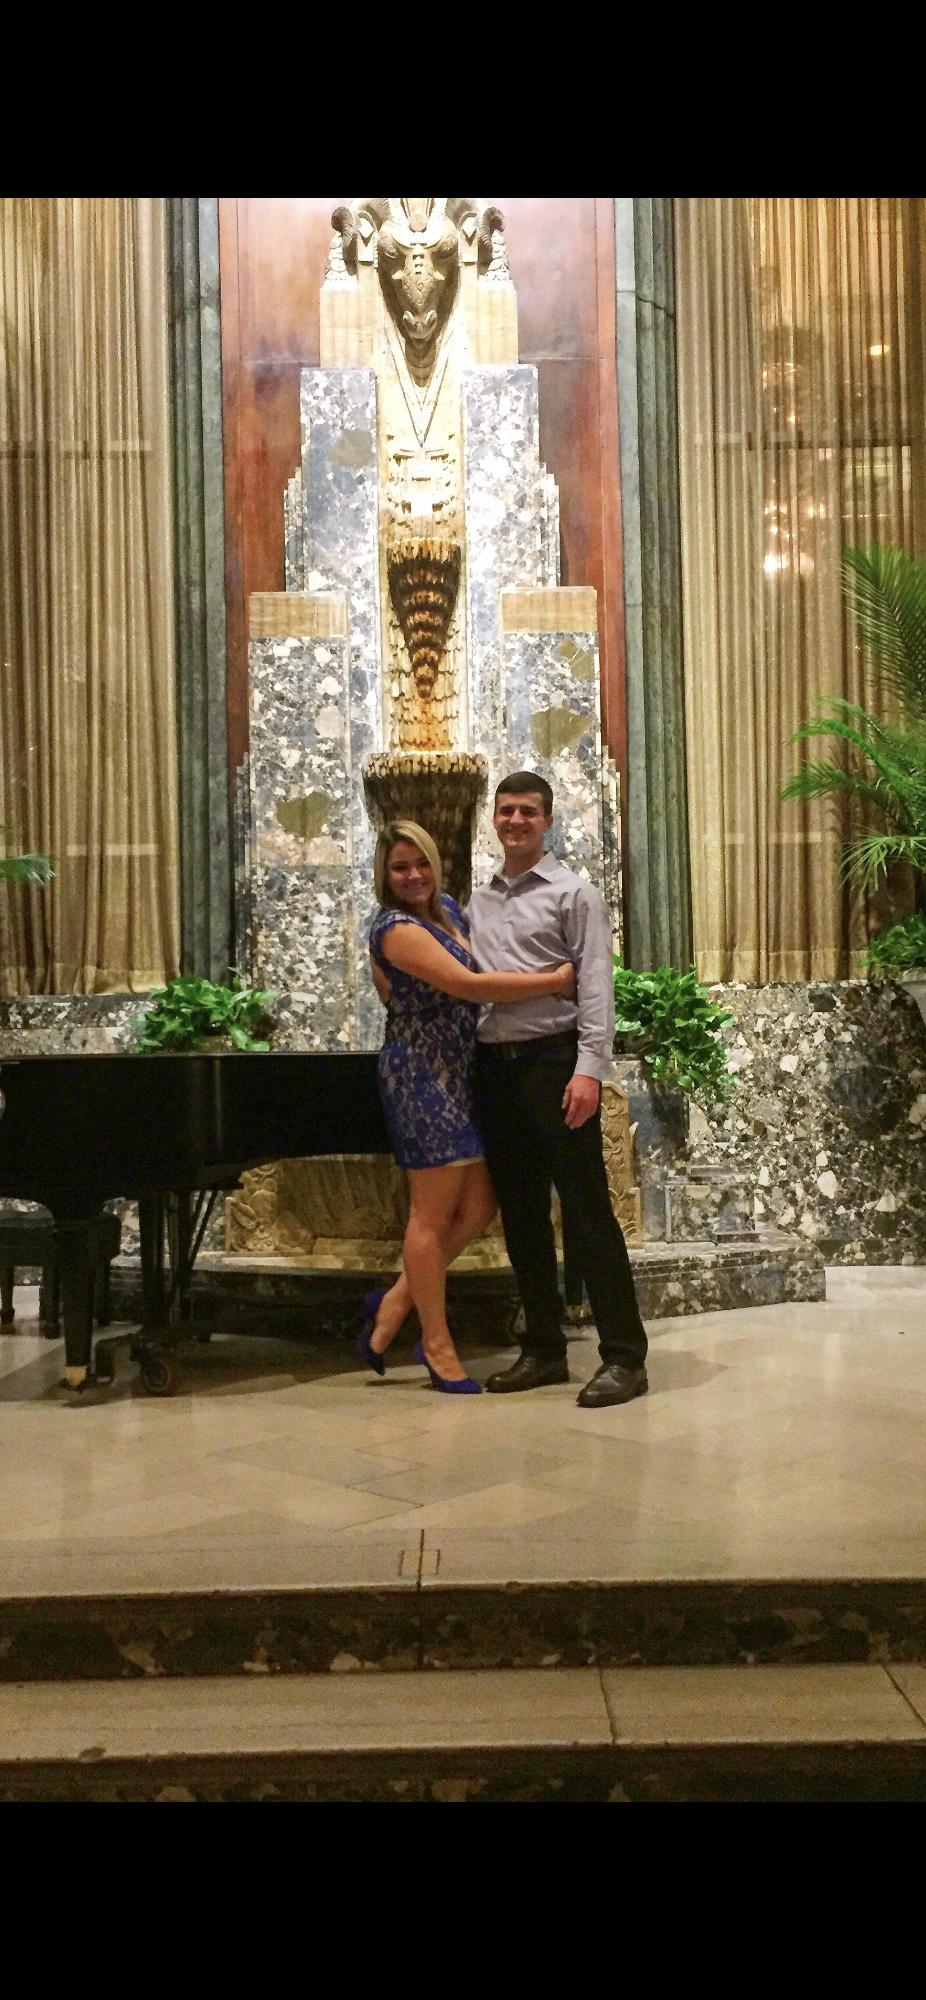 10.02.16
Our 1 year anniversary at the Hilton Netherlands Plaza after dinner at Palm Orchids